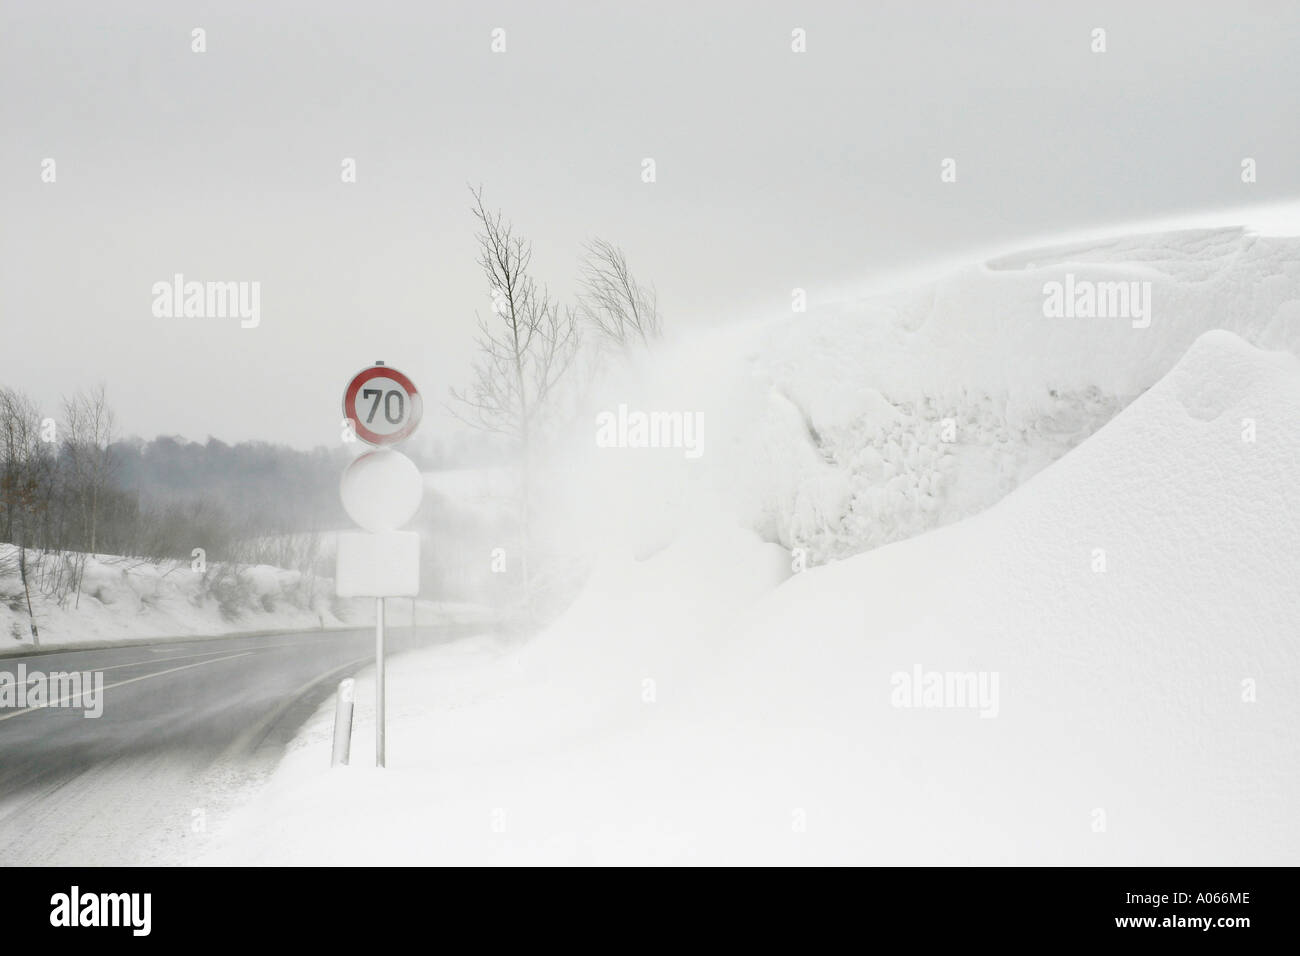 A glare of snow is seen near the road with a signboard at its side Stock Photo